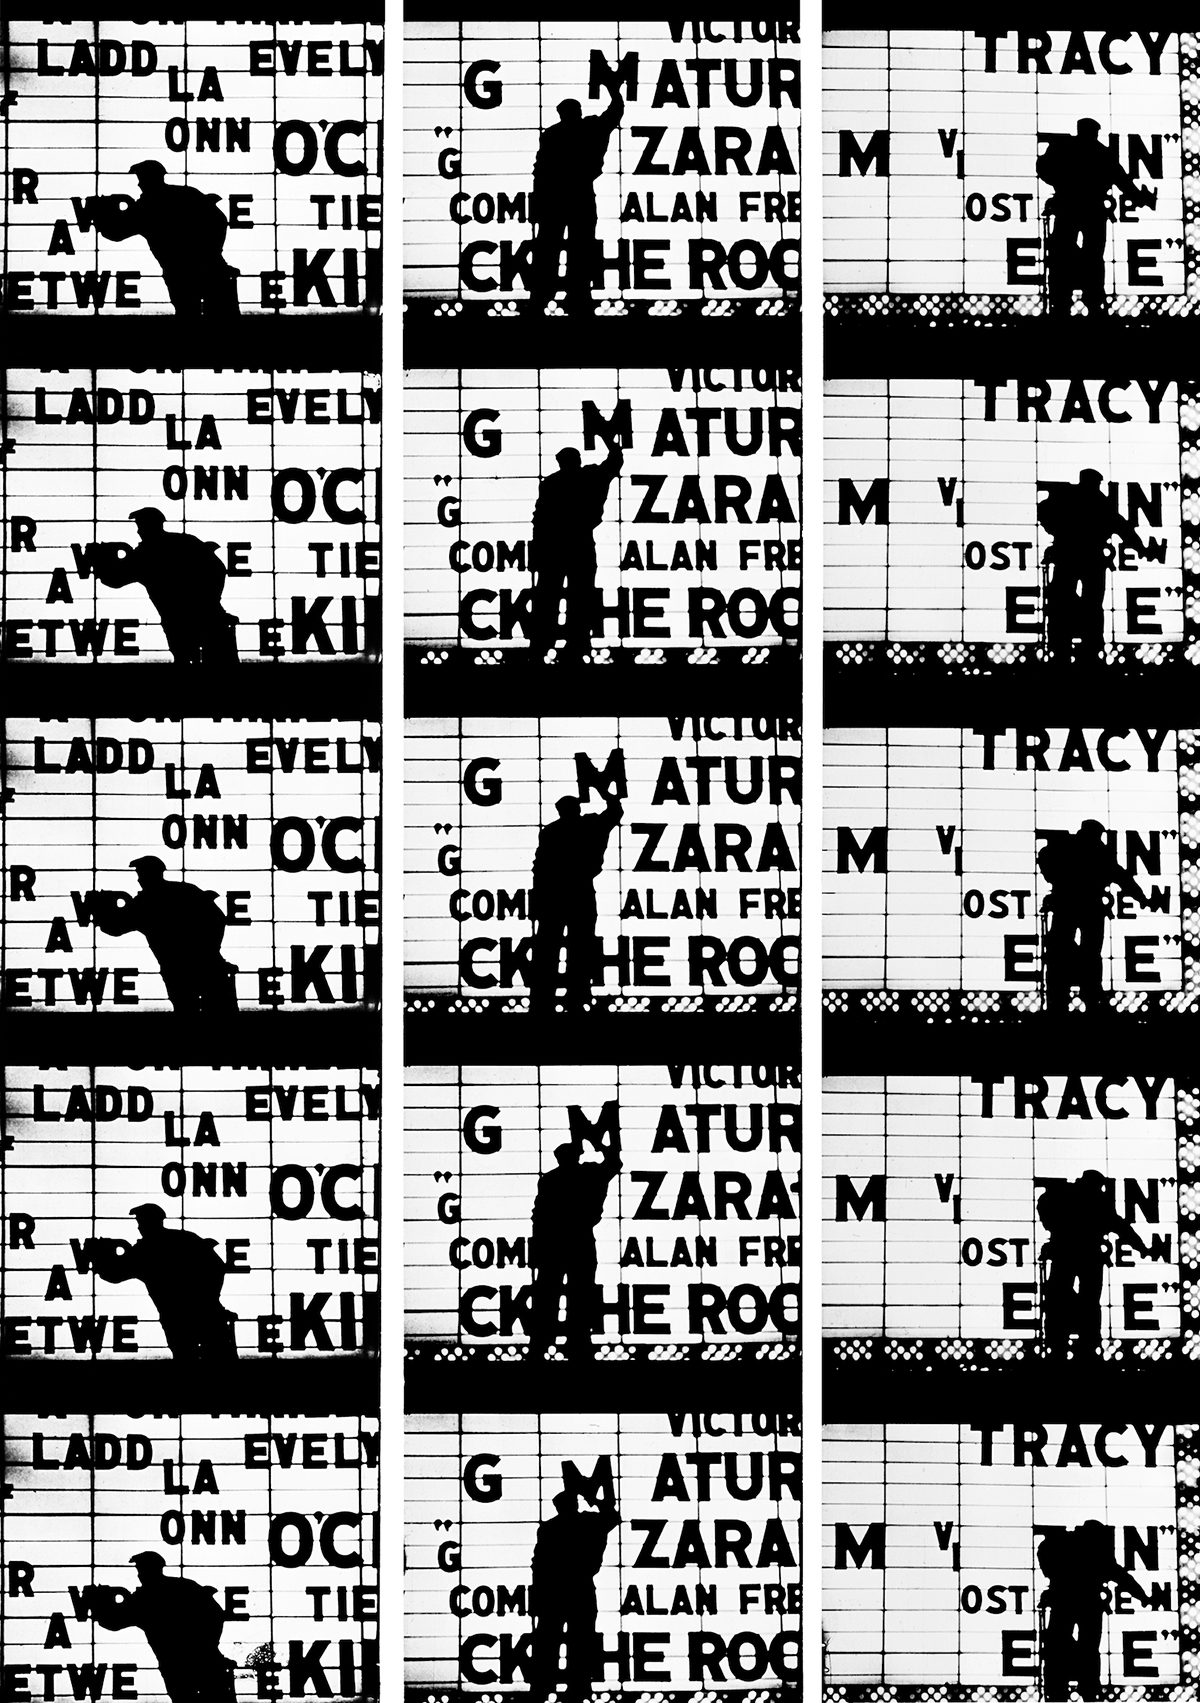 Film strips showing the letters on a broadway sign being changed, as part of the new William Klein exhibition called YES at the ICP